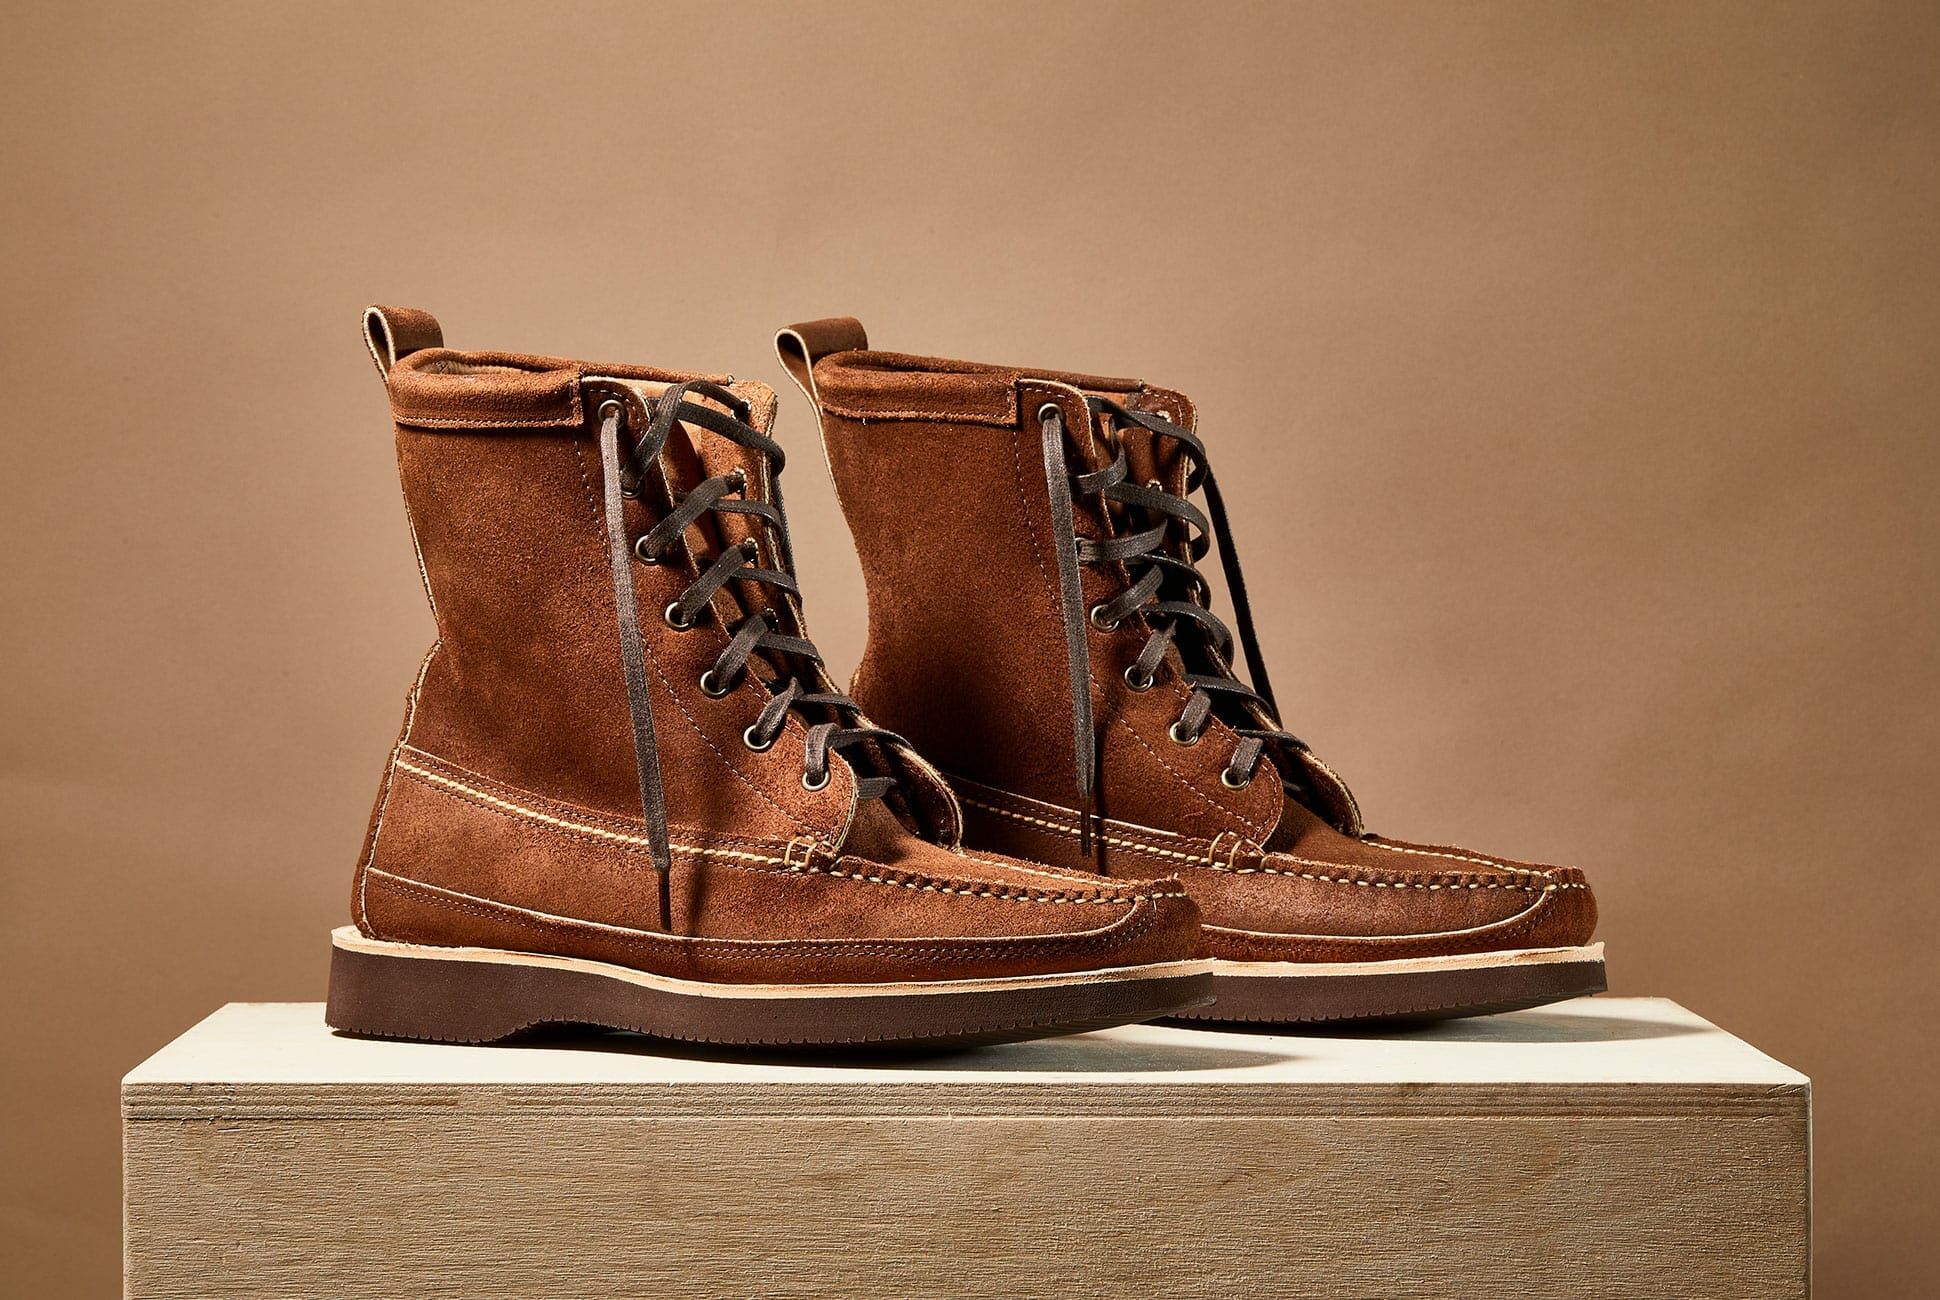 moccasin type boots